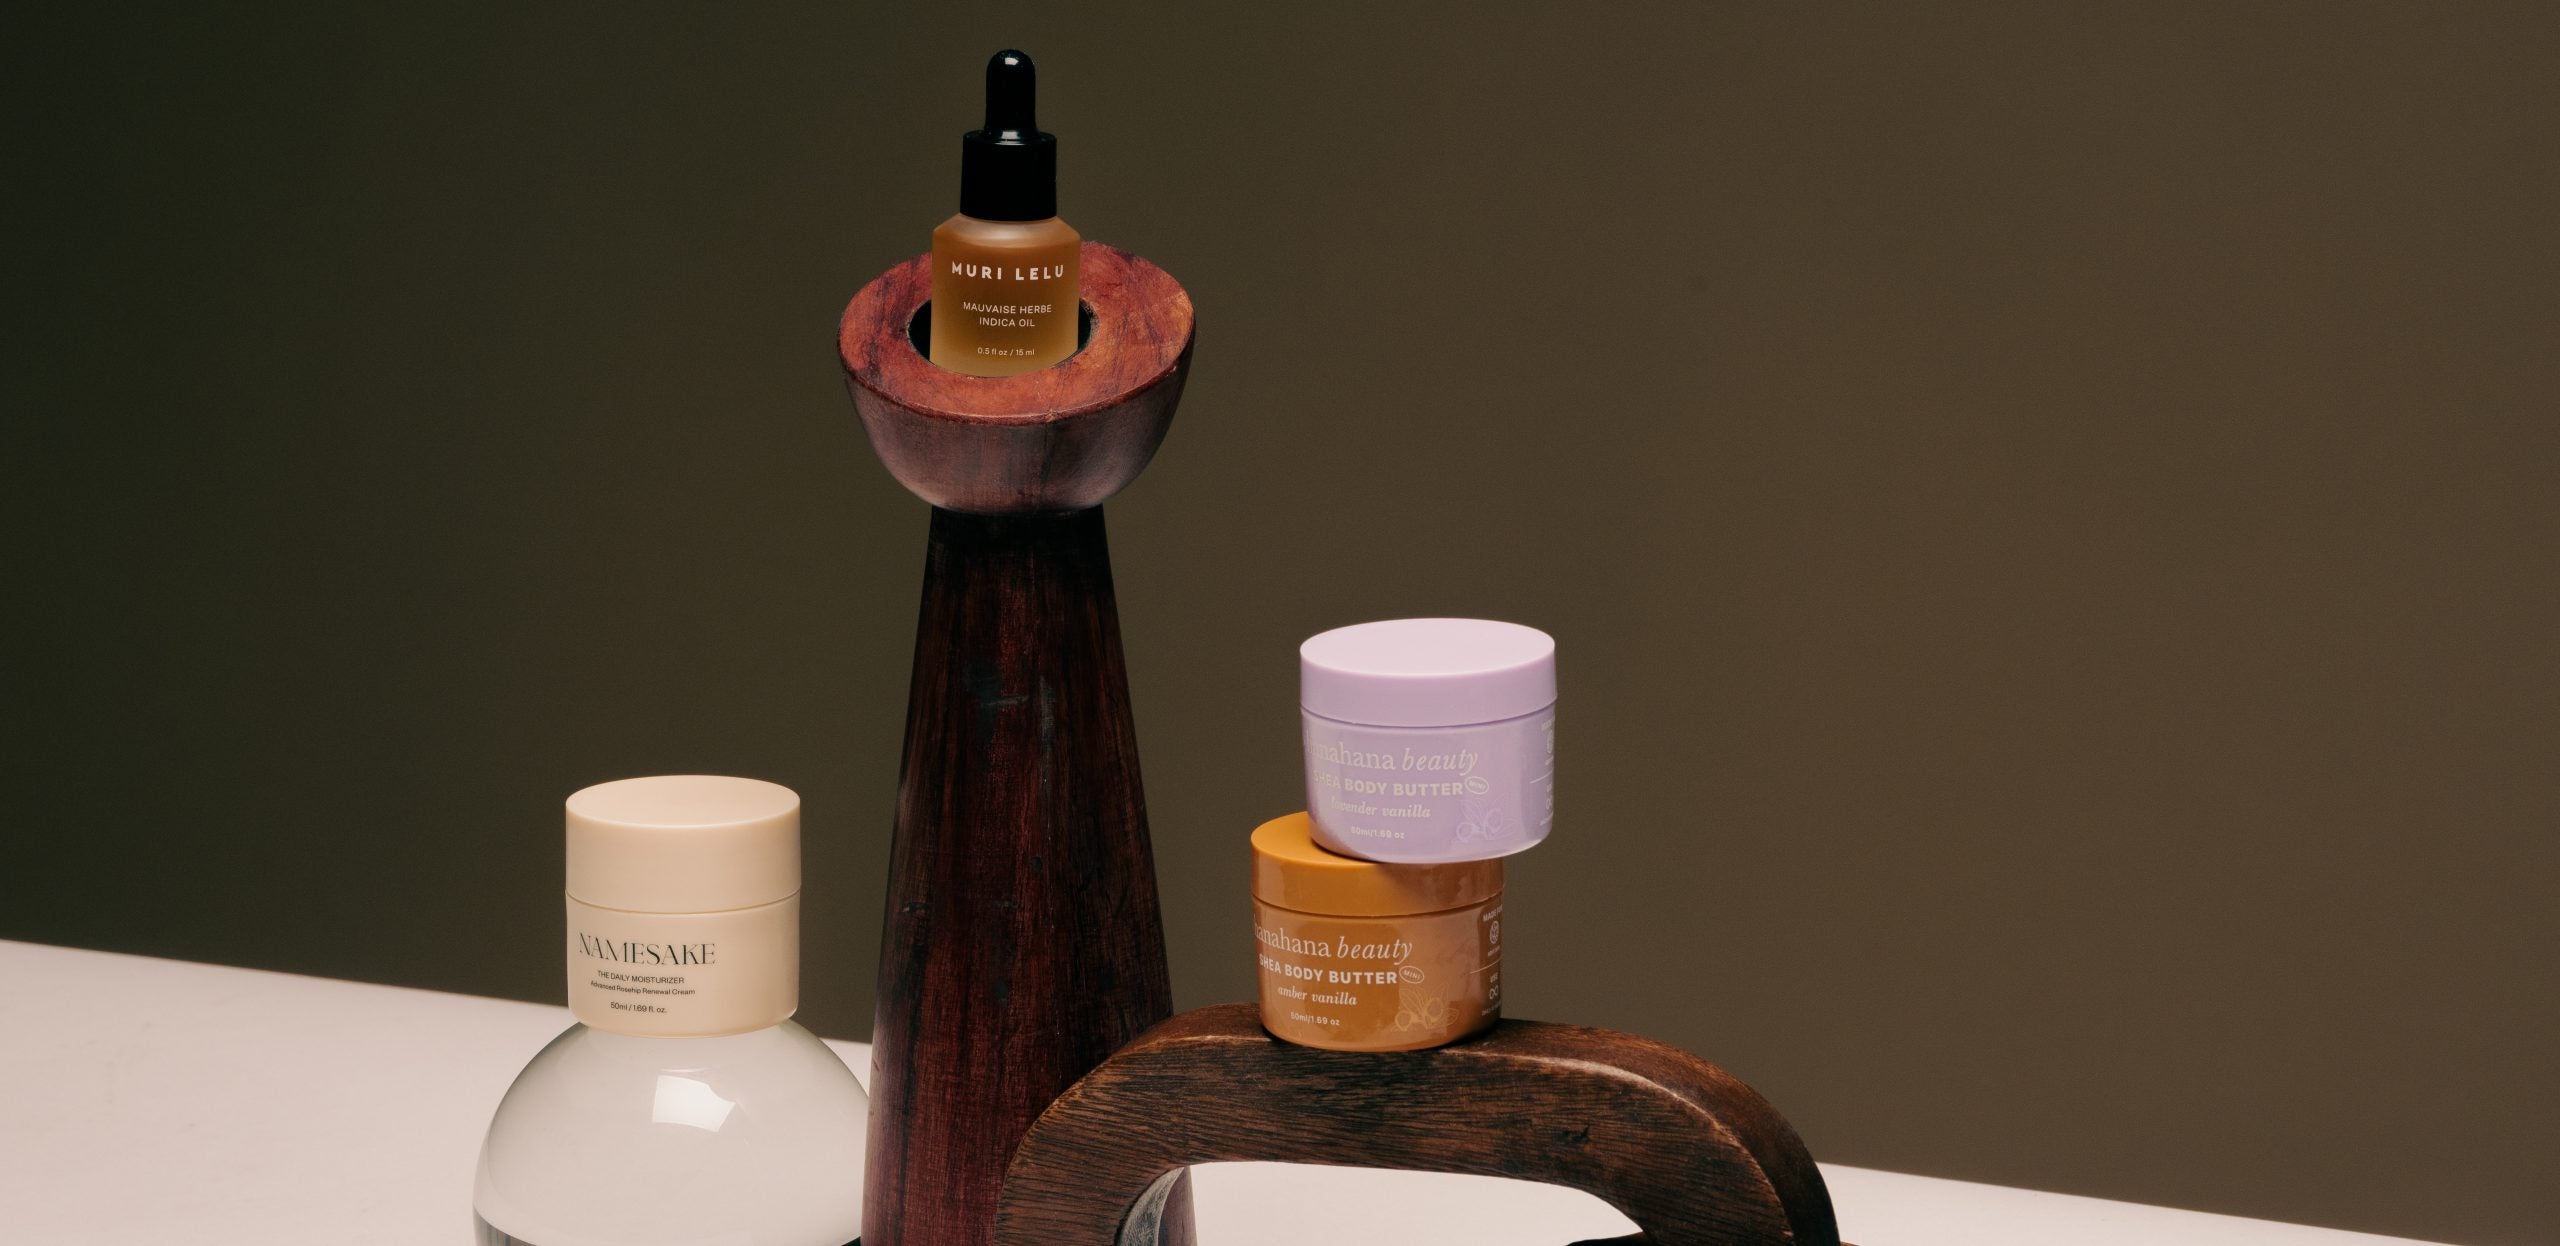 Meet Skintellect: The New Retailer Amplifying Black-Owned Beauty Brands